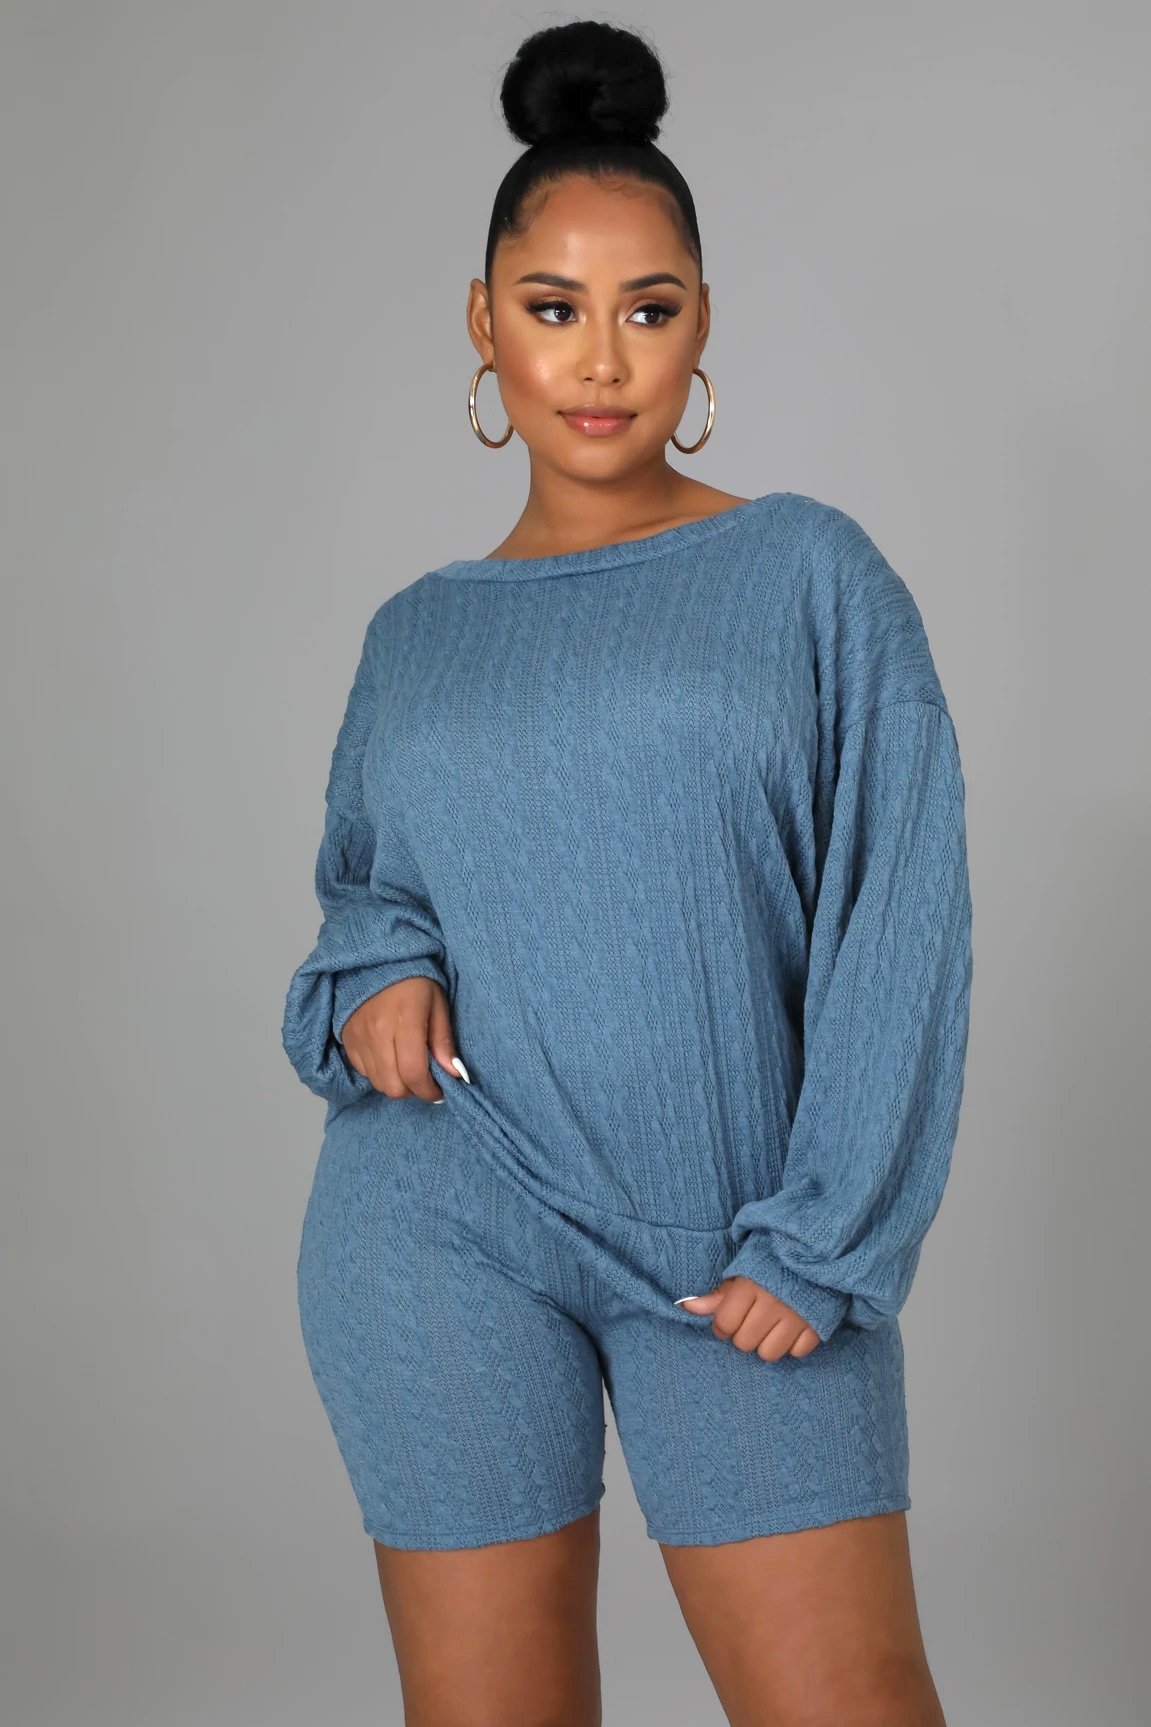 Don't Get It Twisted Sweater Short Set Teal Blue - Ali’s Couture 